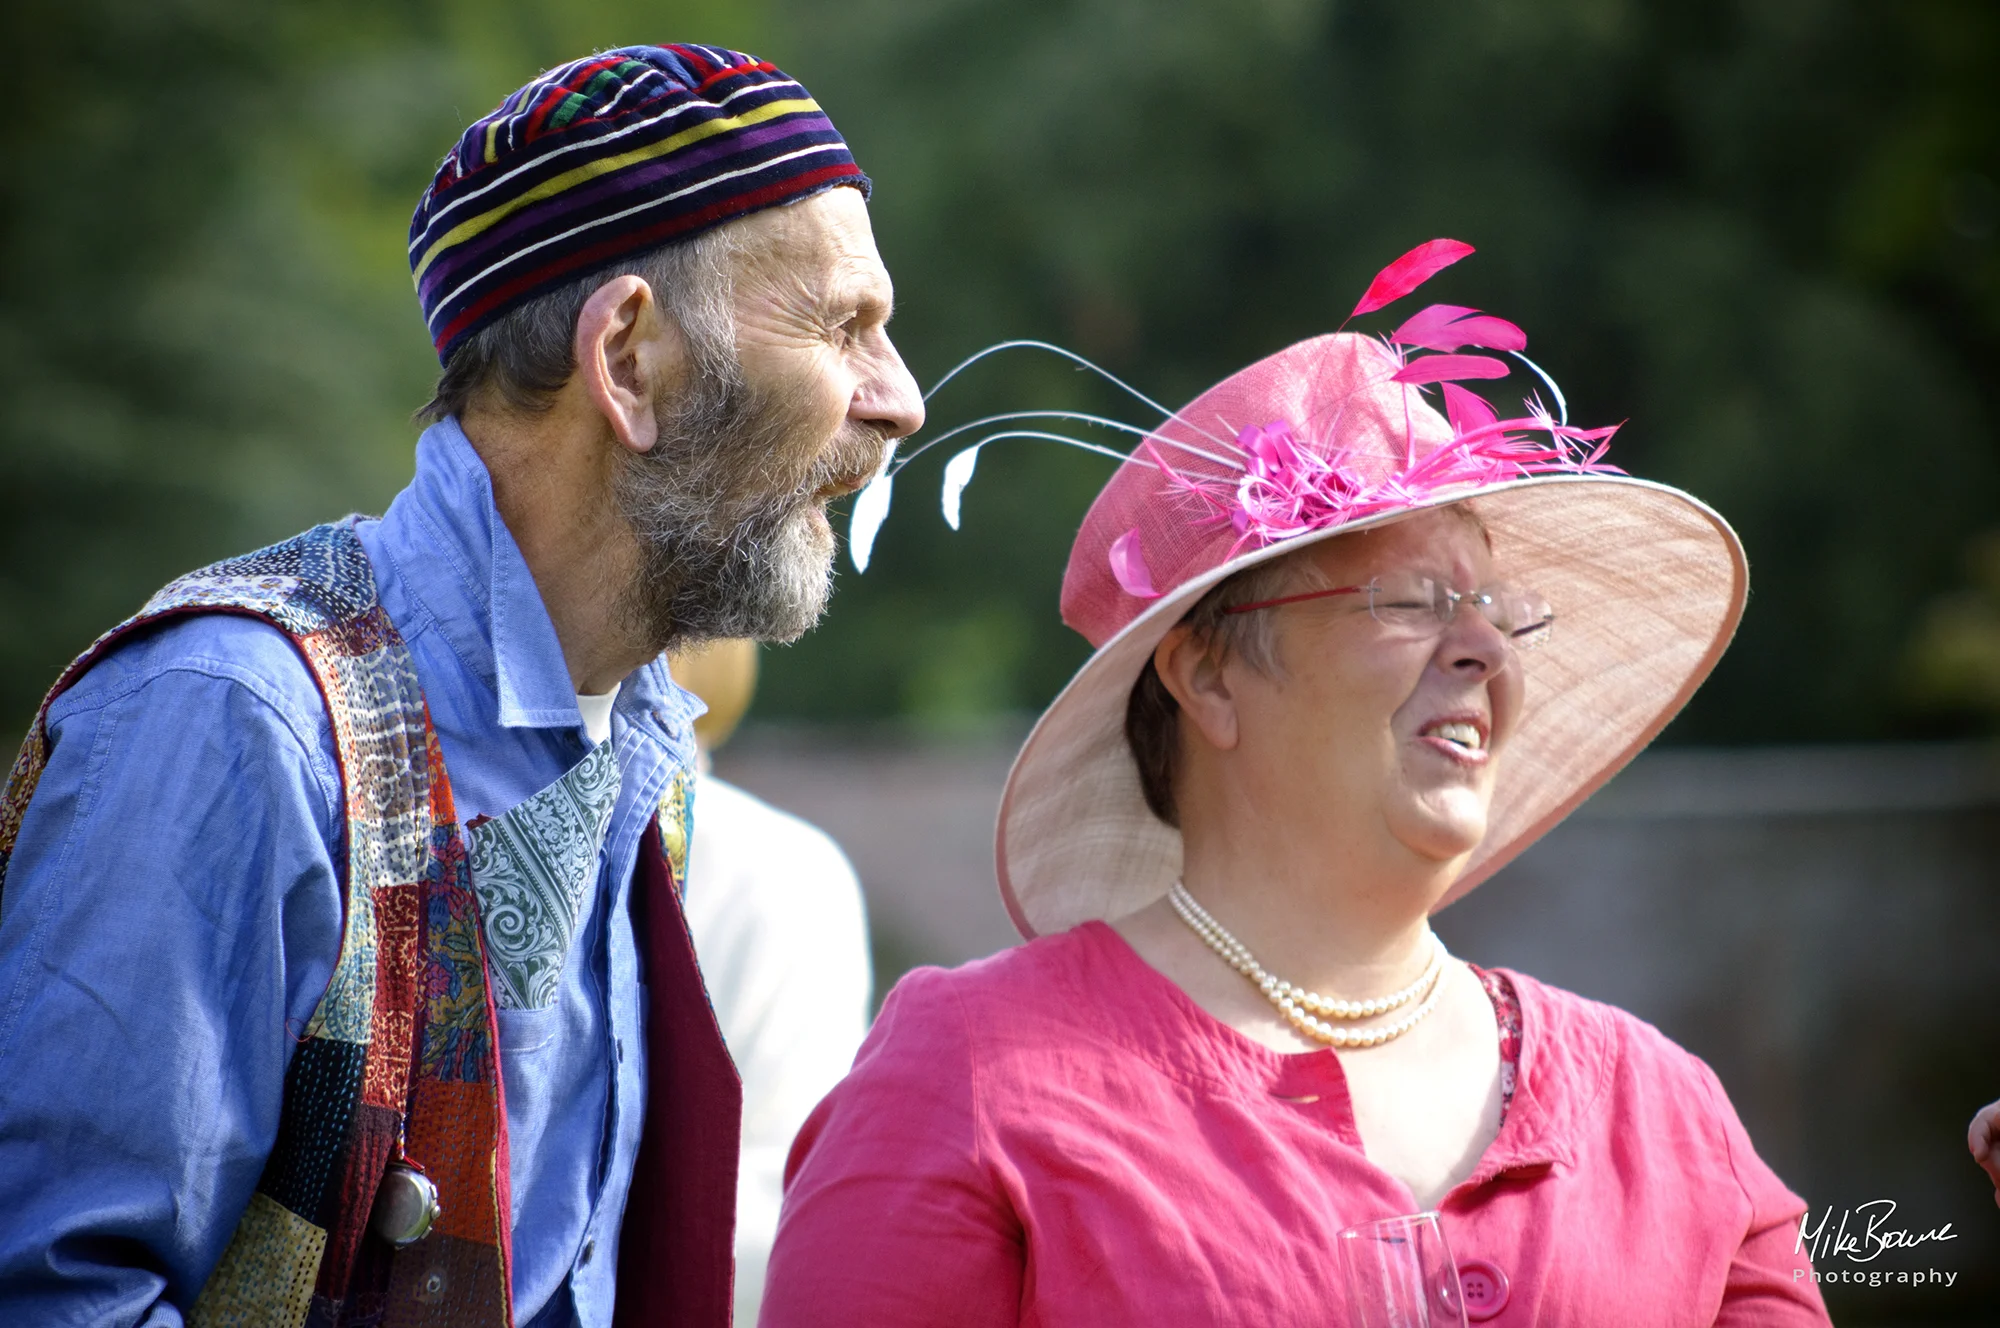 Bearded man wearing new age clothes laughing with a woman in a pink hat with feathers